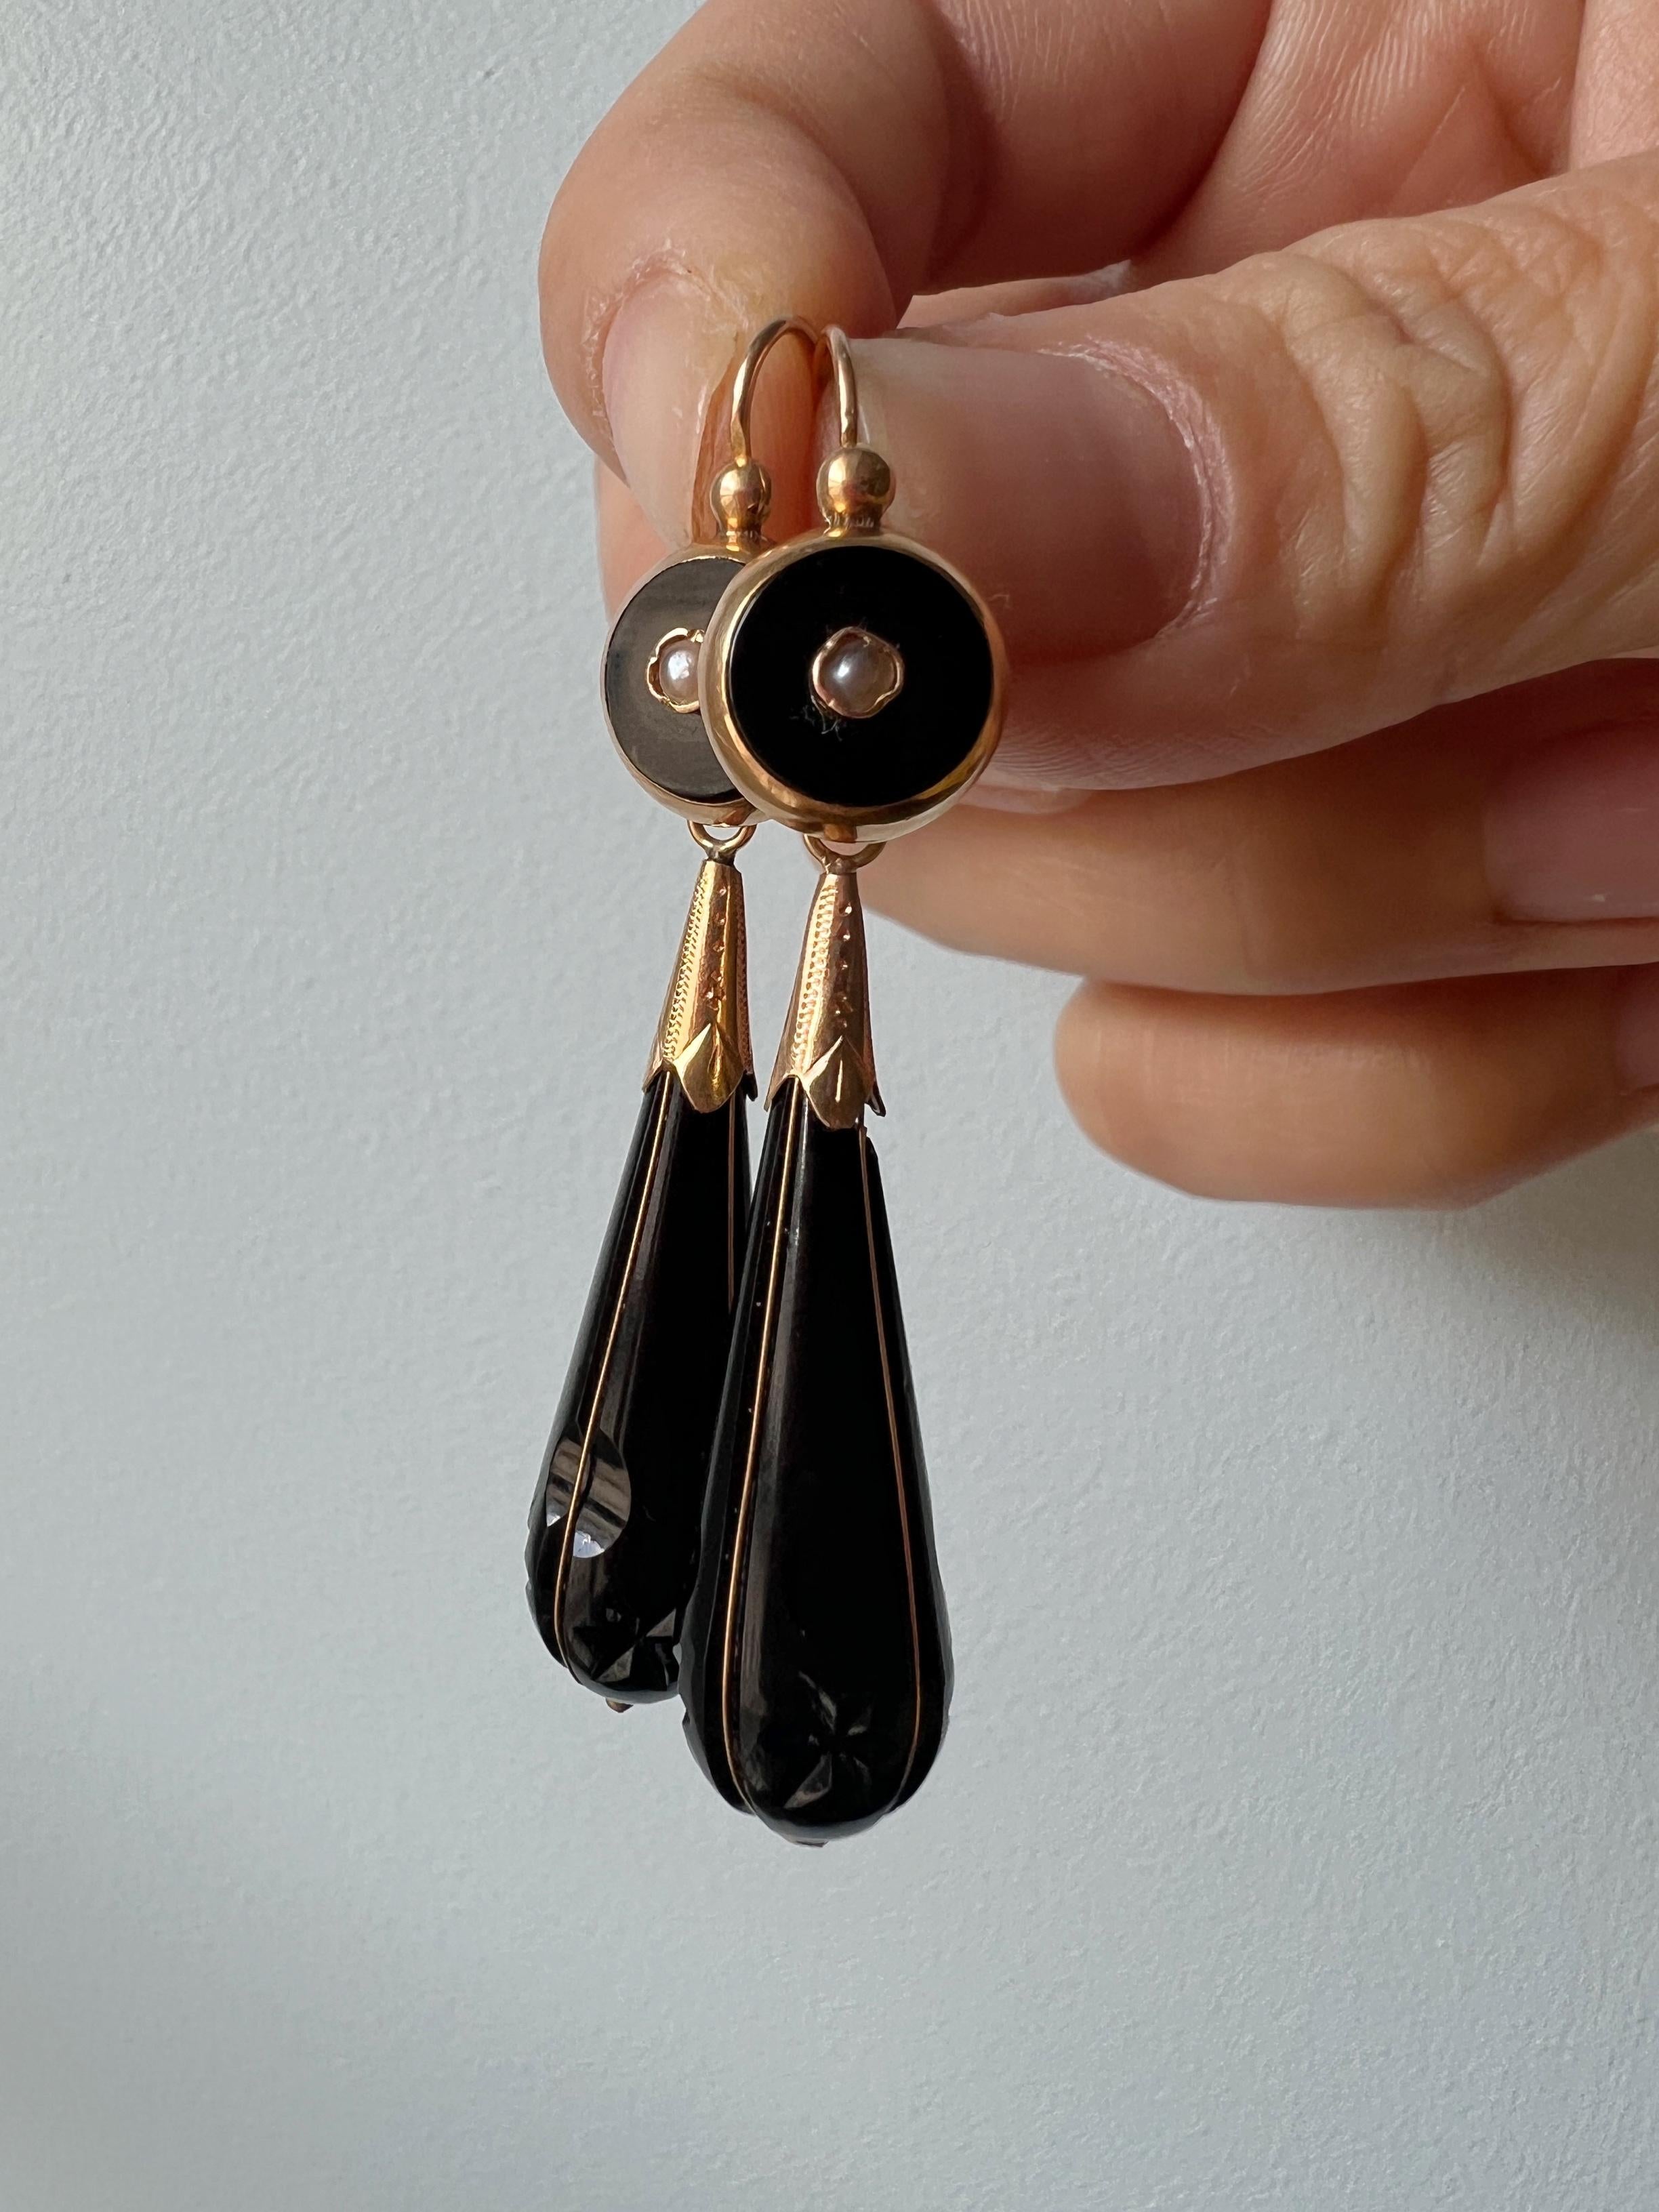 Magnificent is the first word that comes to mind when looking at this incredible day & night drop earrings made of black onyx: always mysterious, this gemstone provides a luxury appeal and a dramatic contrast to the warm 18K yellow gold color used